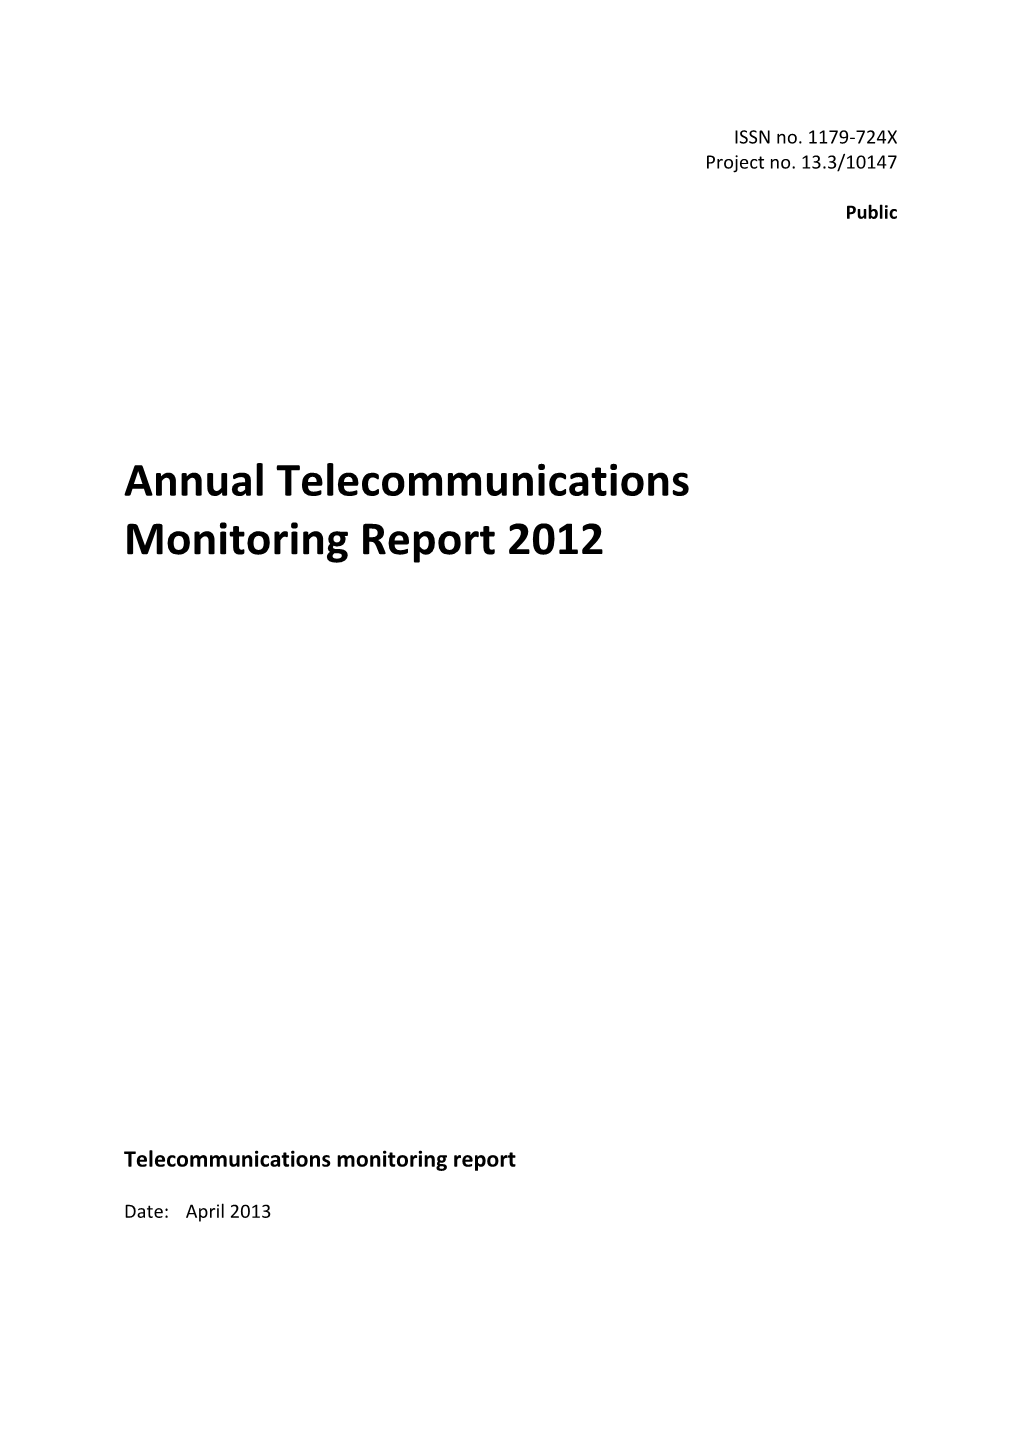 Annual Telecommunications Monitoring Report 2012